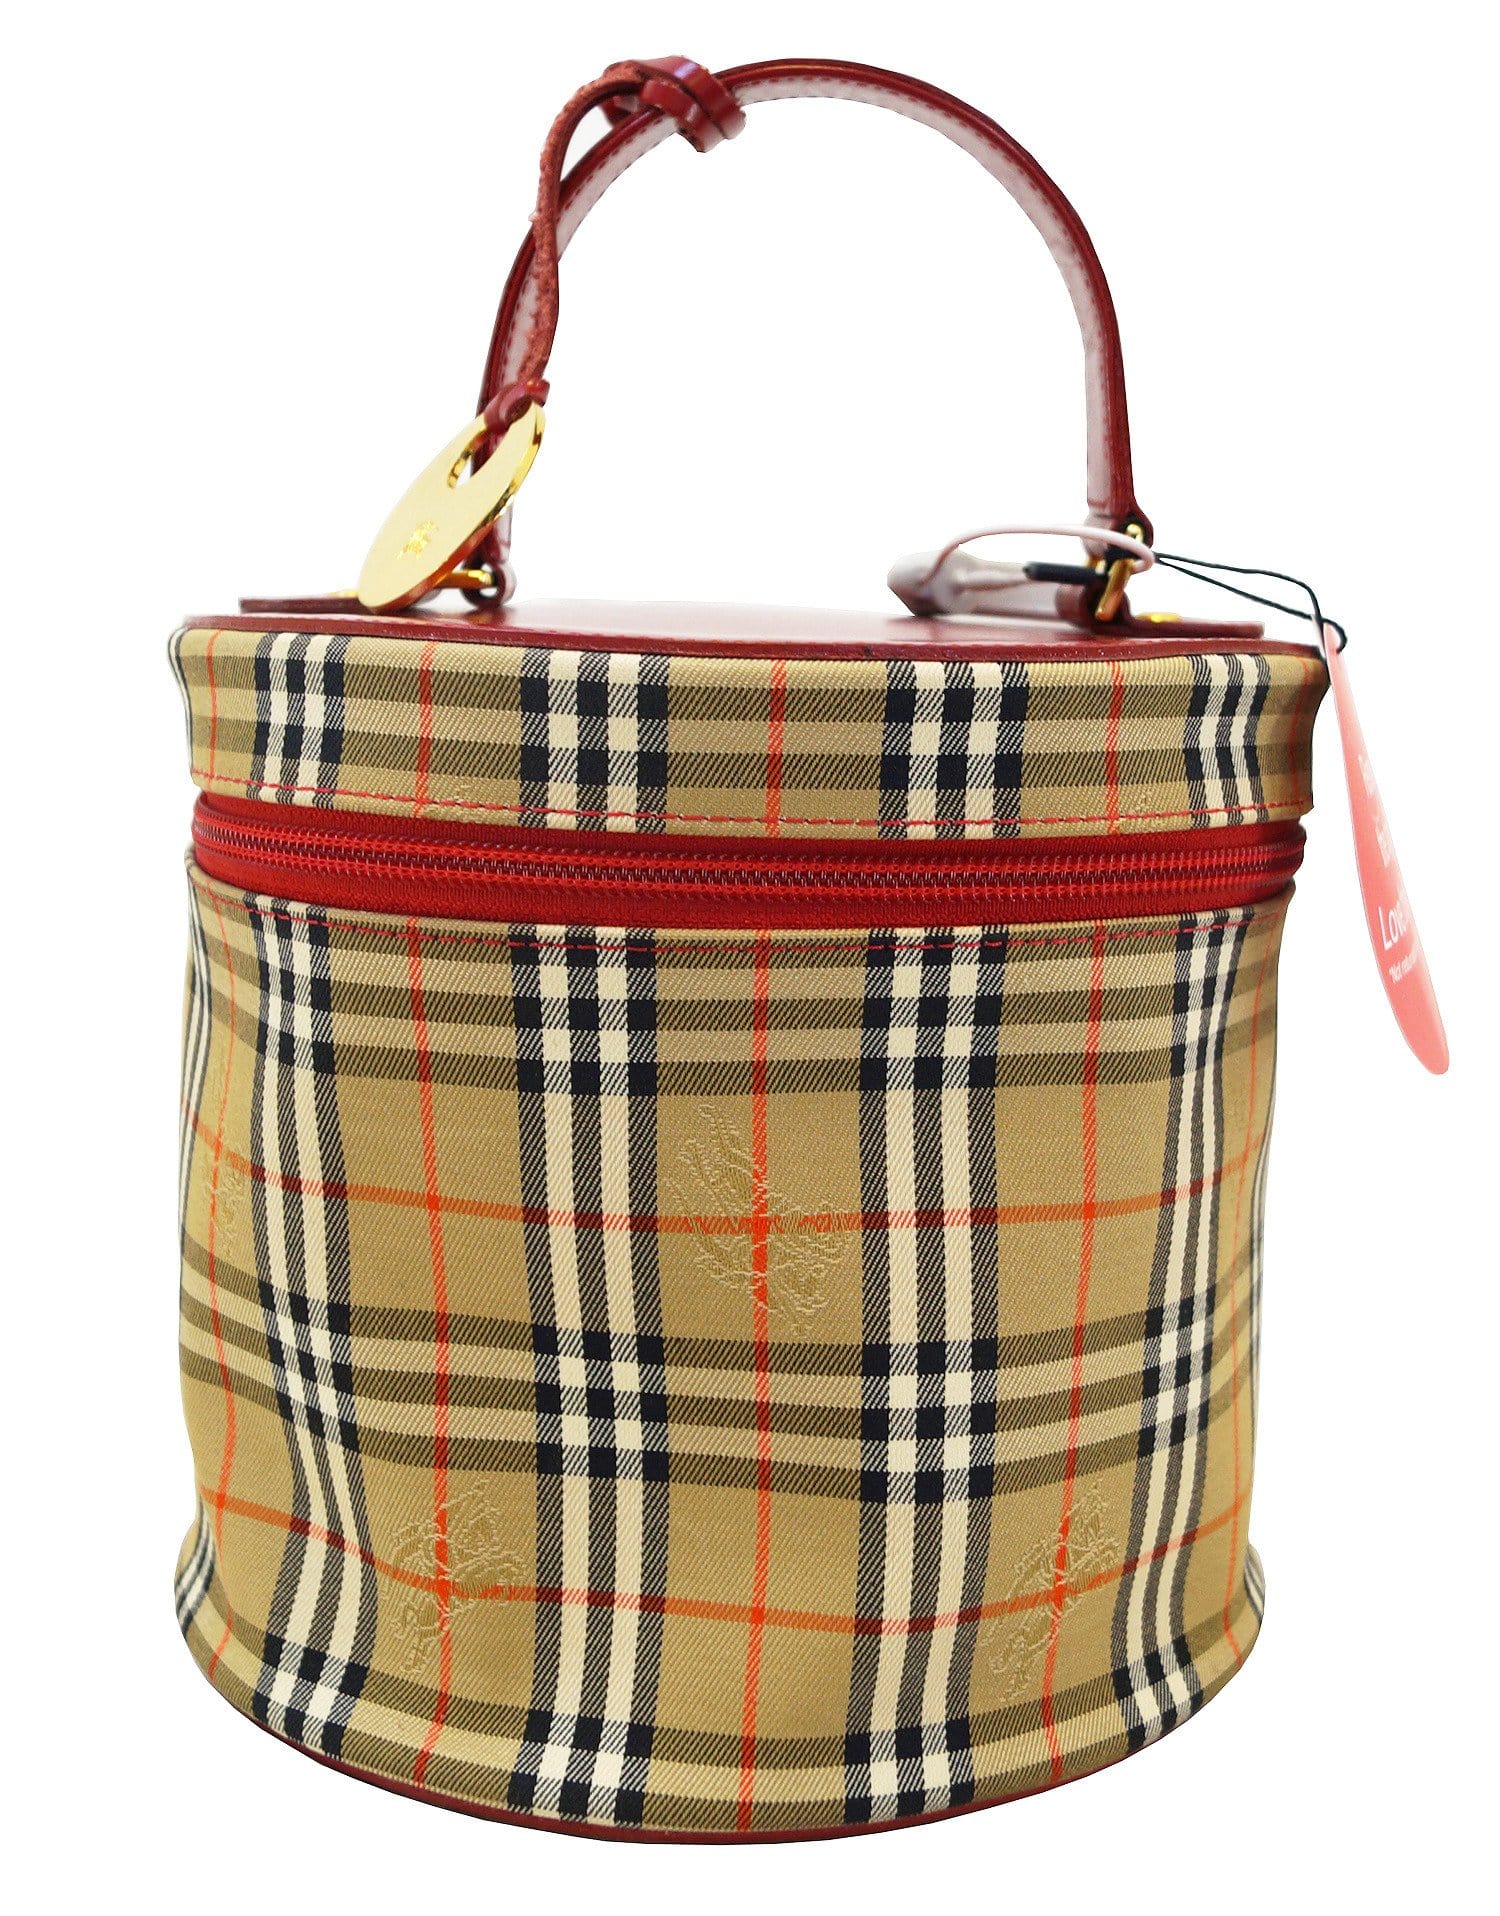 Burberry Check-pattern Tote Bag in Brown